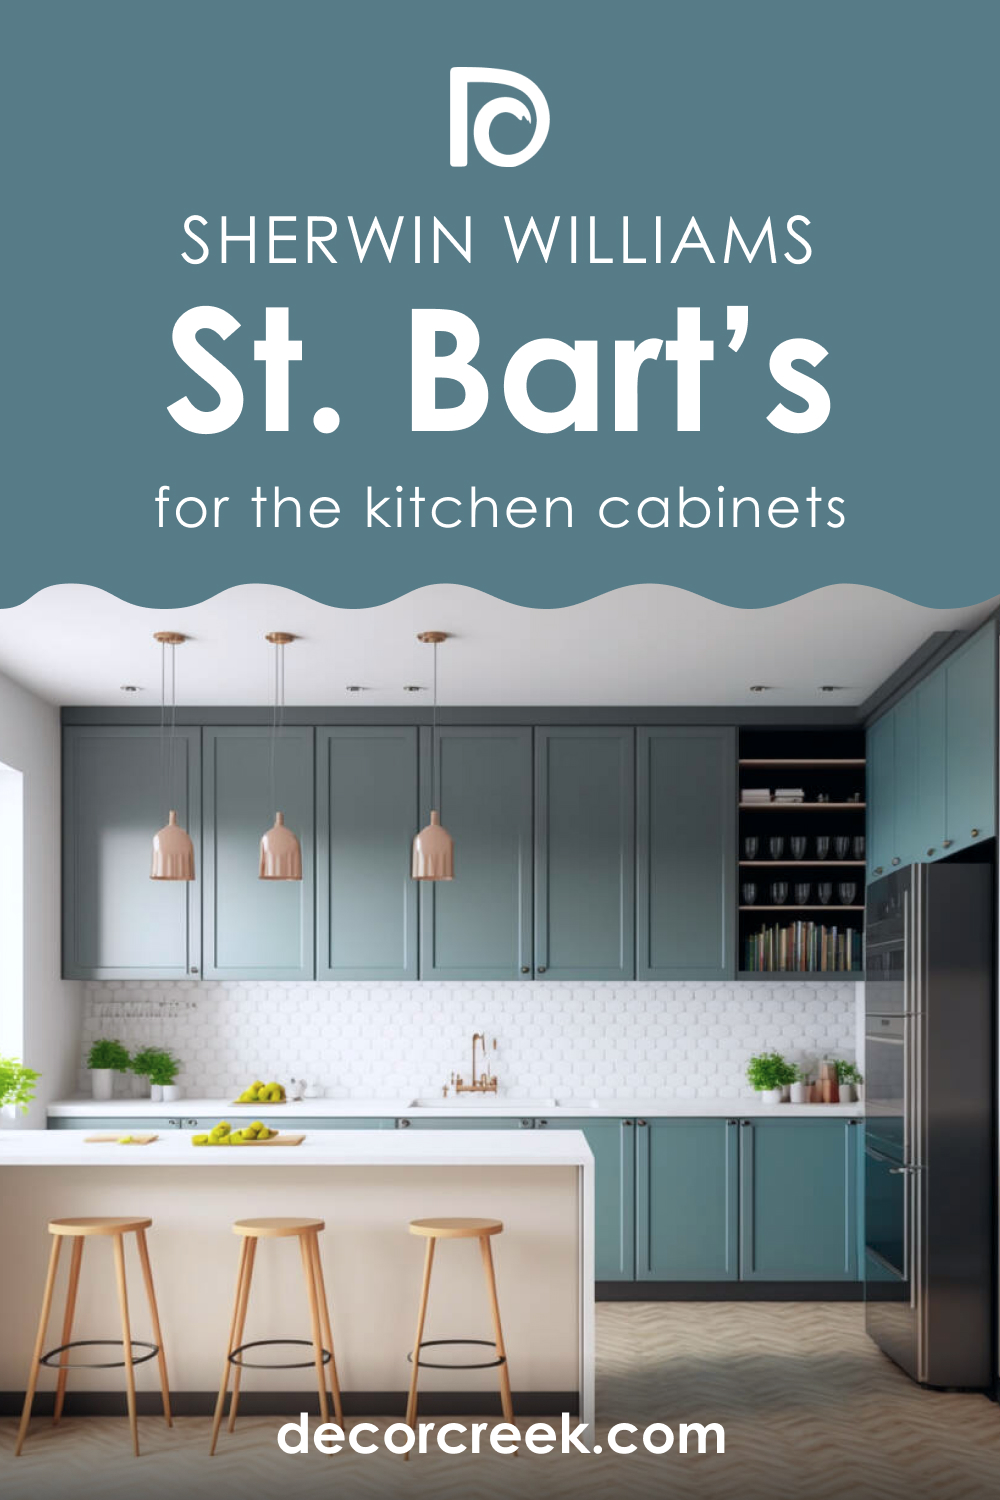 How to Use SW 7614 St. Bart’s for the Kitchen Cabinets?